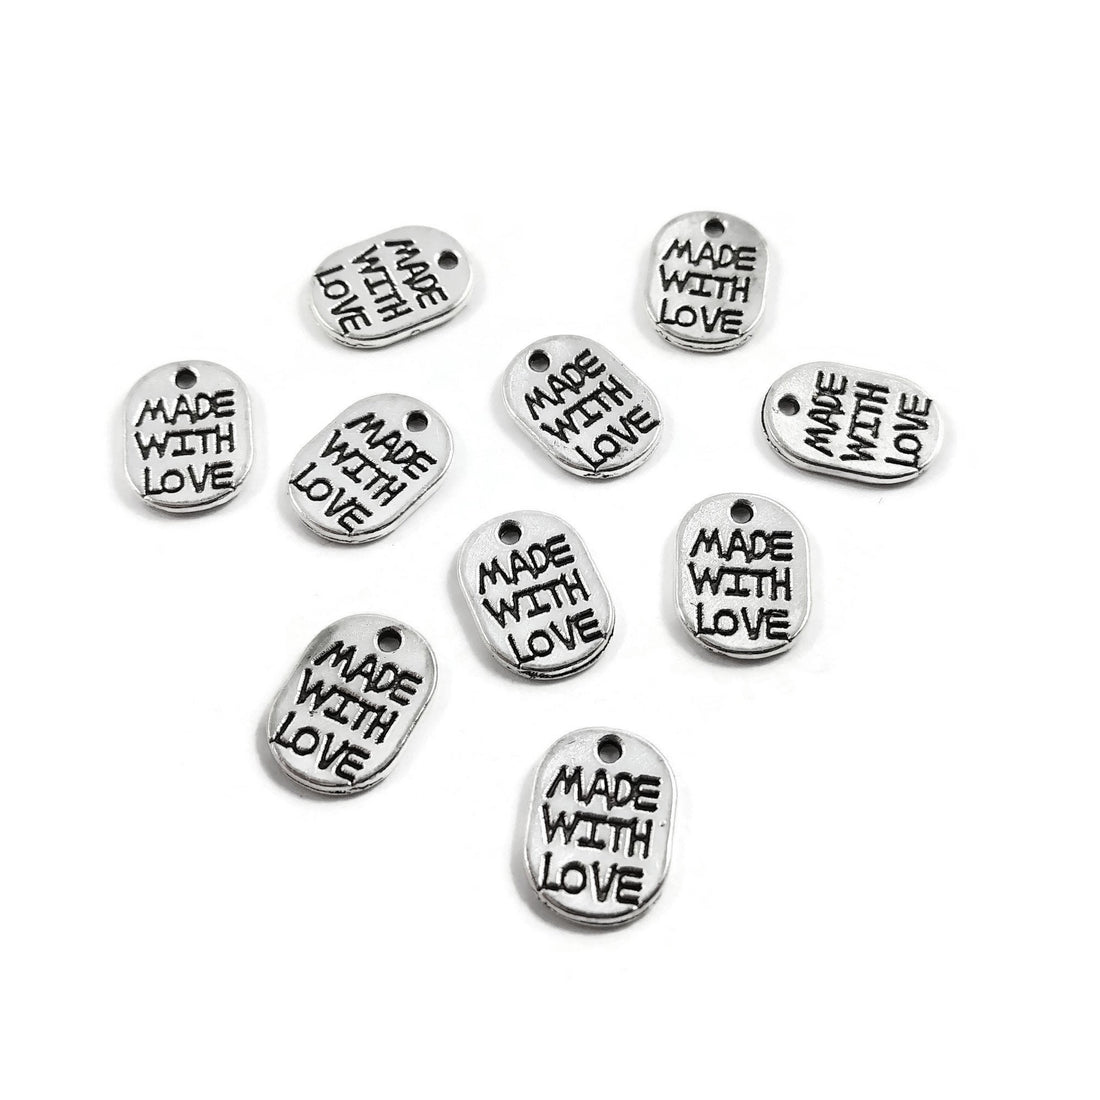 10 MADE WITH LOVE charms, 11mm nickel free metal pendants, Charms for jewelry making